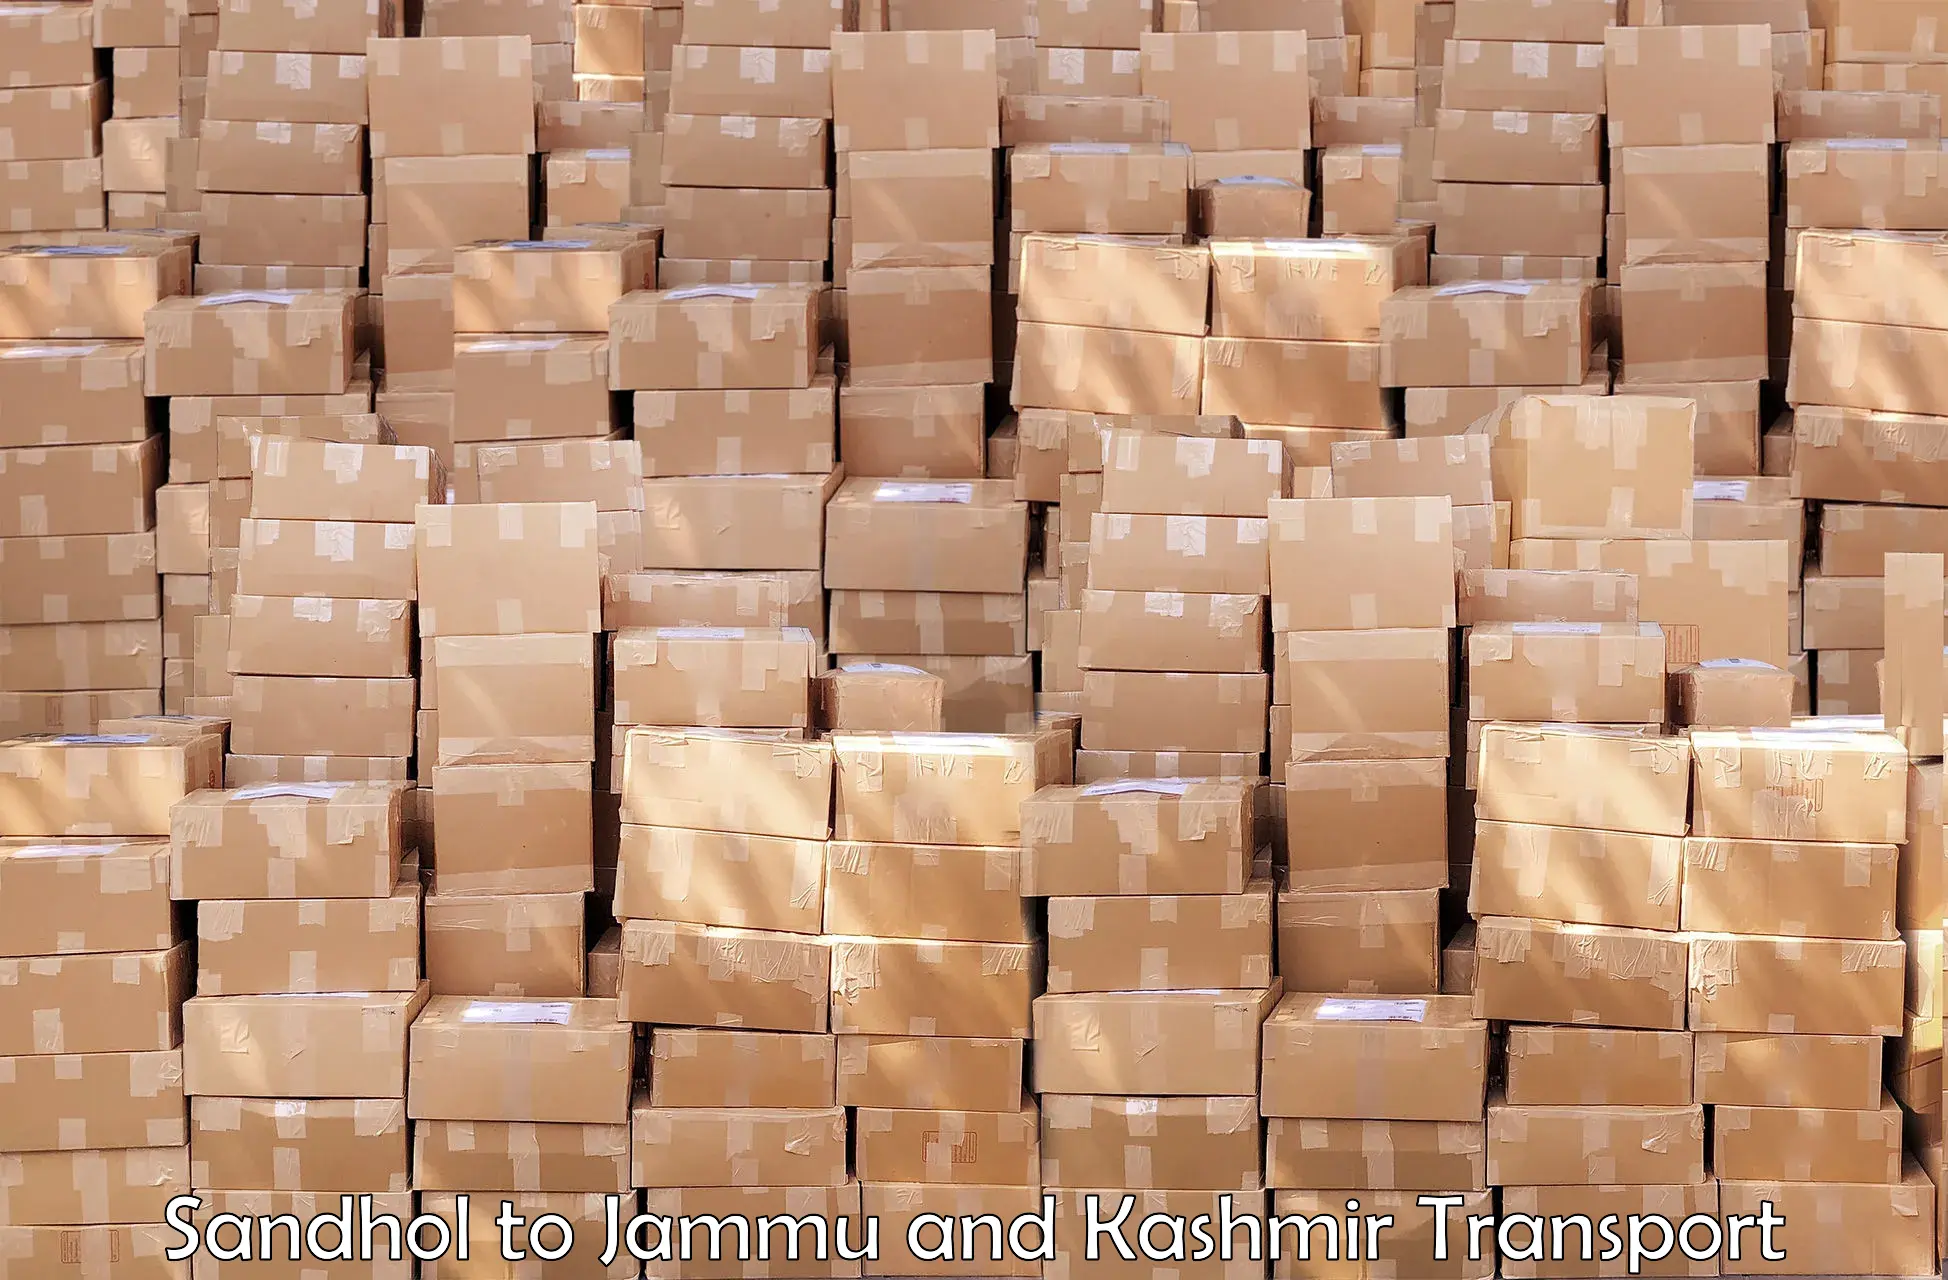 Air freight transport services in Sandhol to Jammu and Kashmir